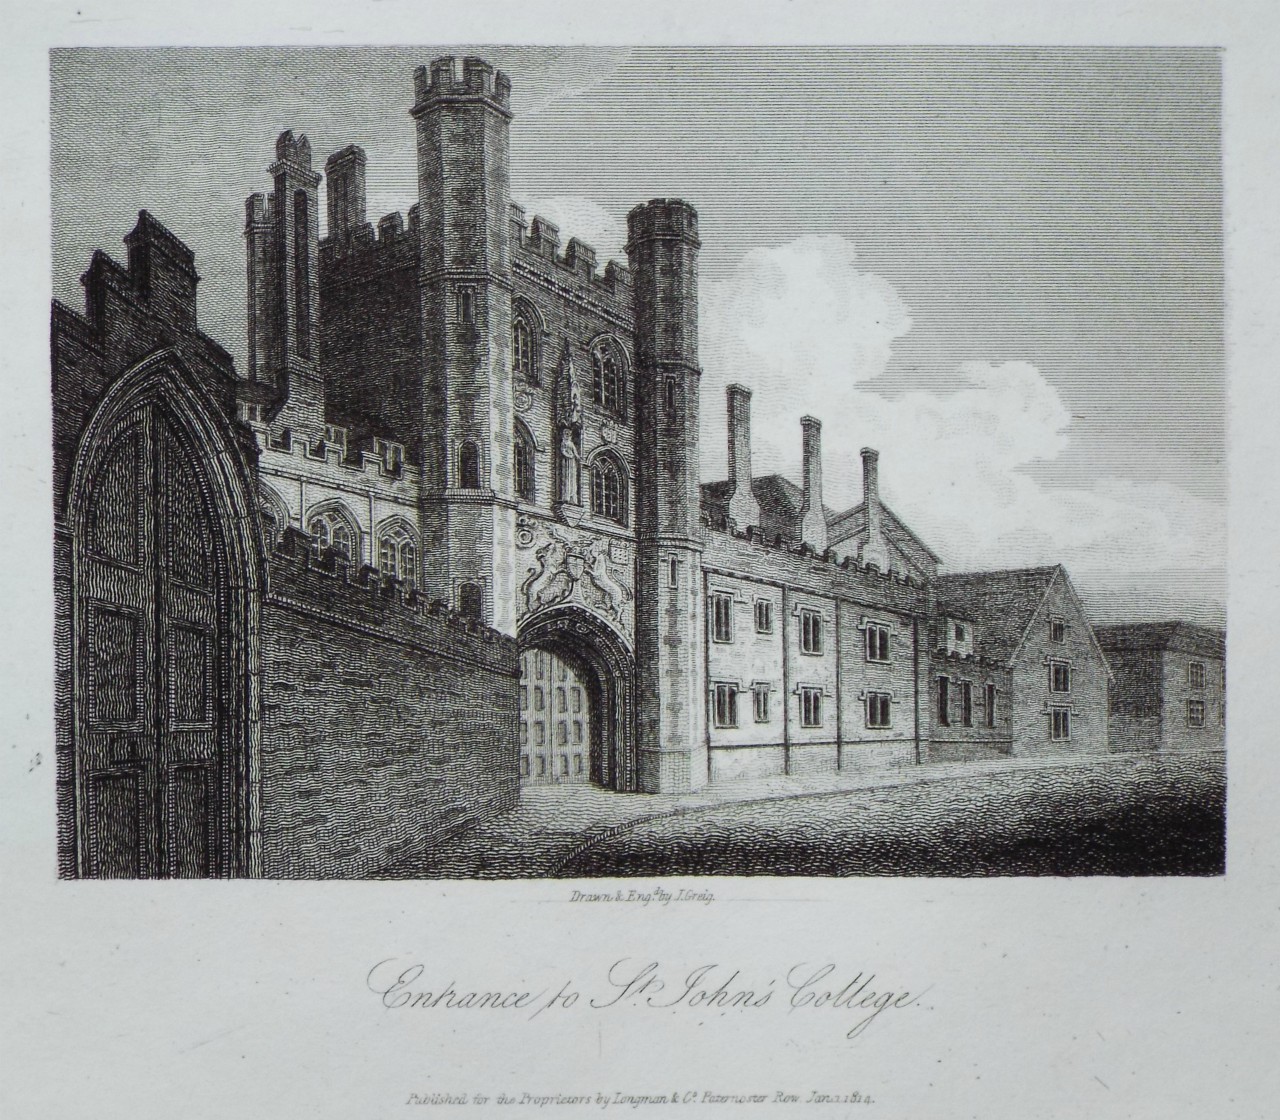 Print - Entrance to St. John's College. - Greig